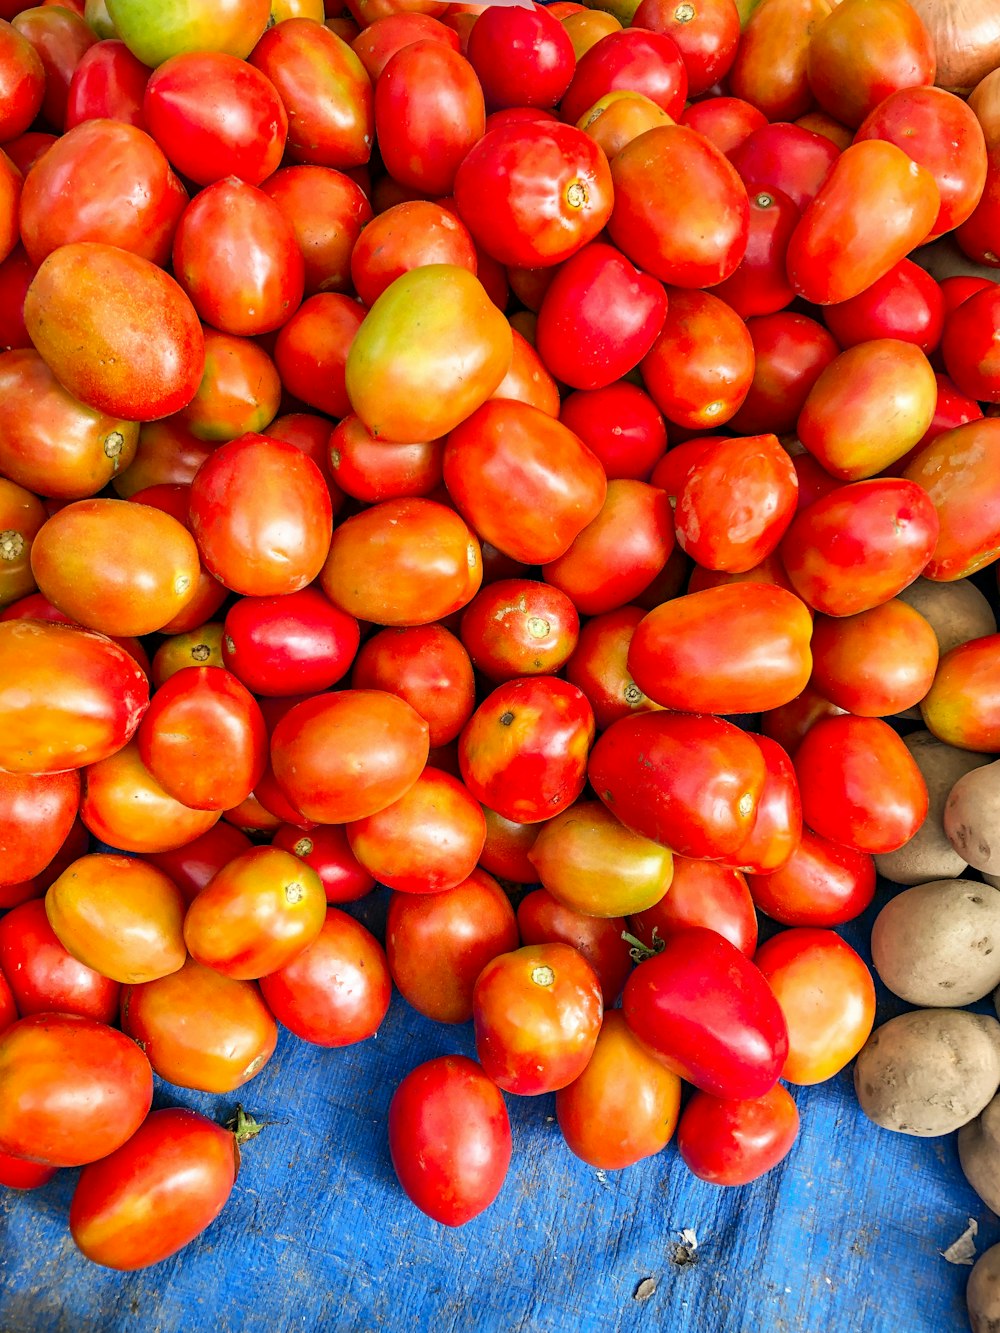 a pile of tomatoes and potatoes on a table